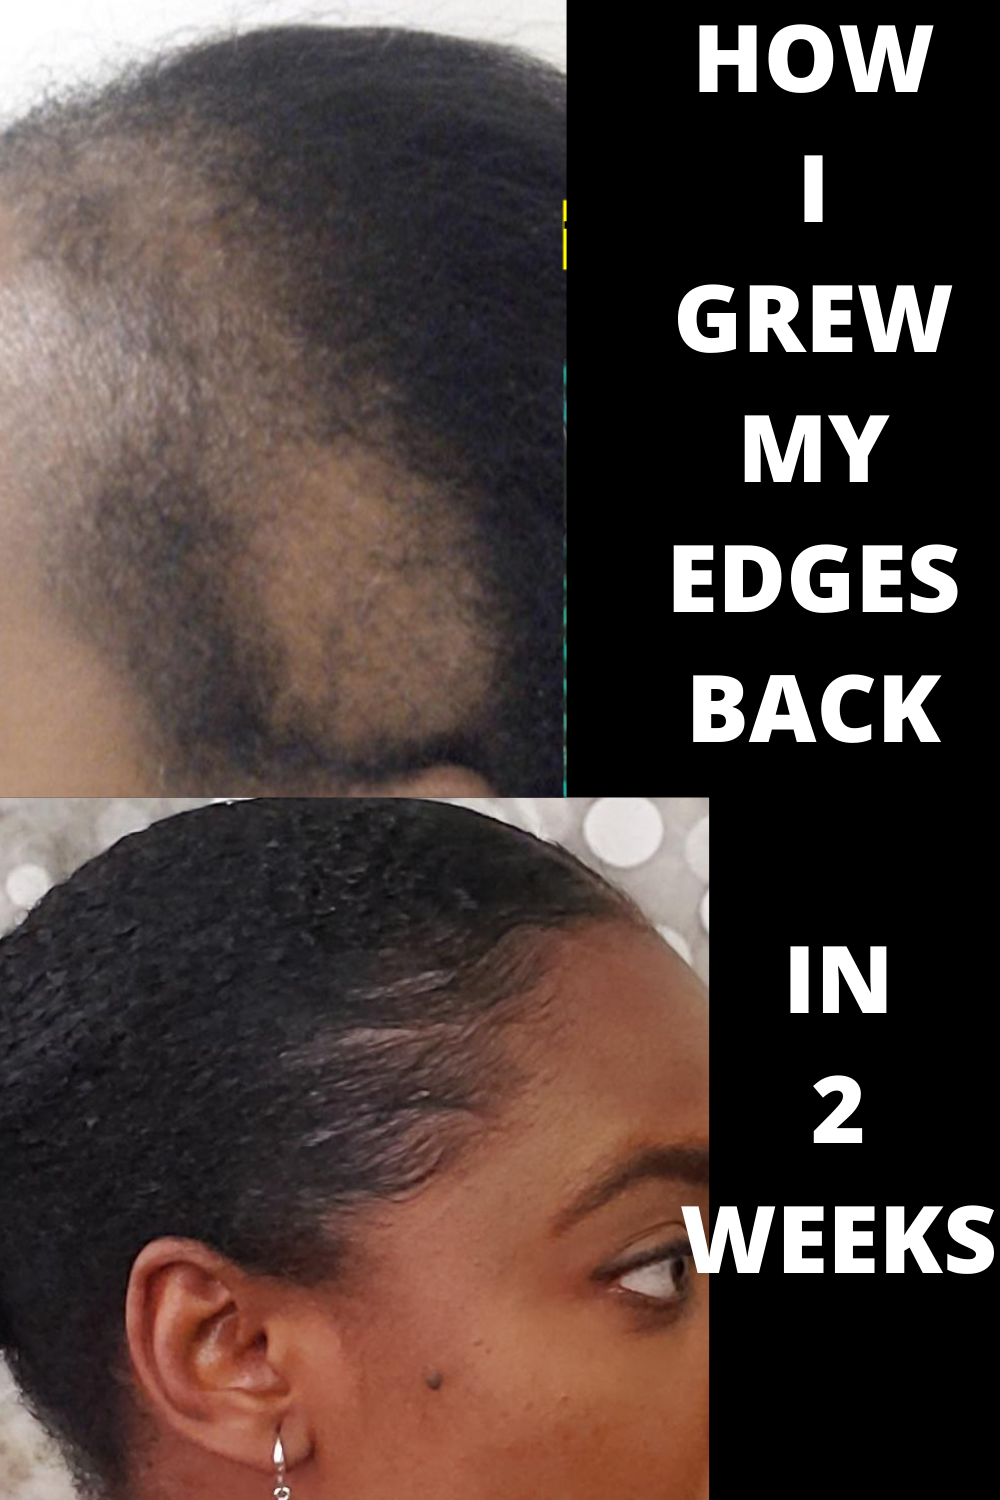 HOW TO GROW YOUR EDGES BACK IN 2 WEEKS